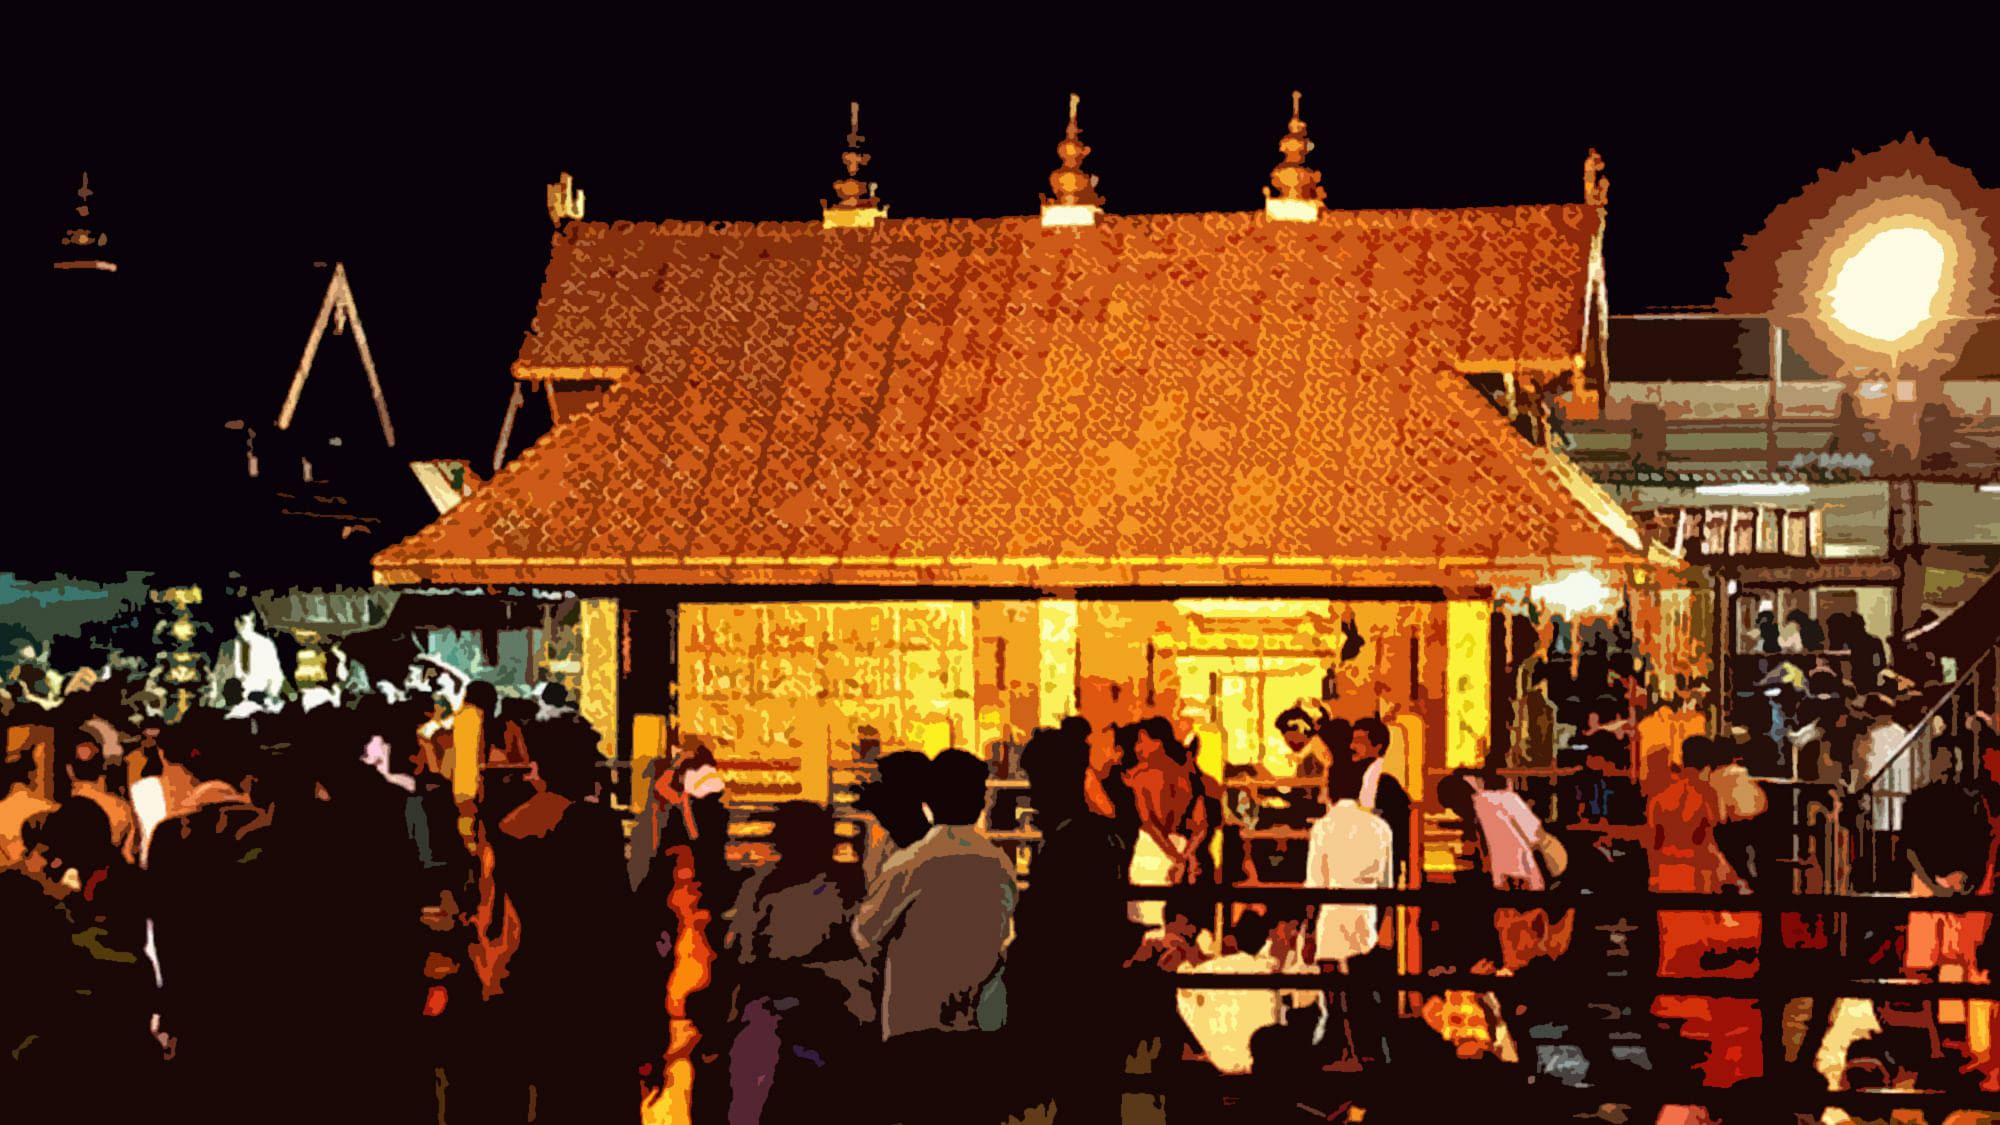 Sabarimala Temple, Kerala denies entry of women and girls between 10-50 years into the temple. (Photo: <b>The Quint</b>)